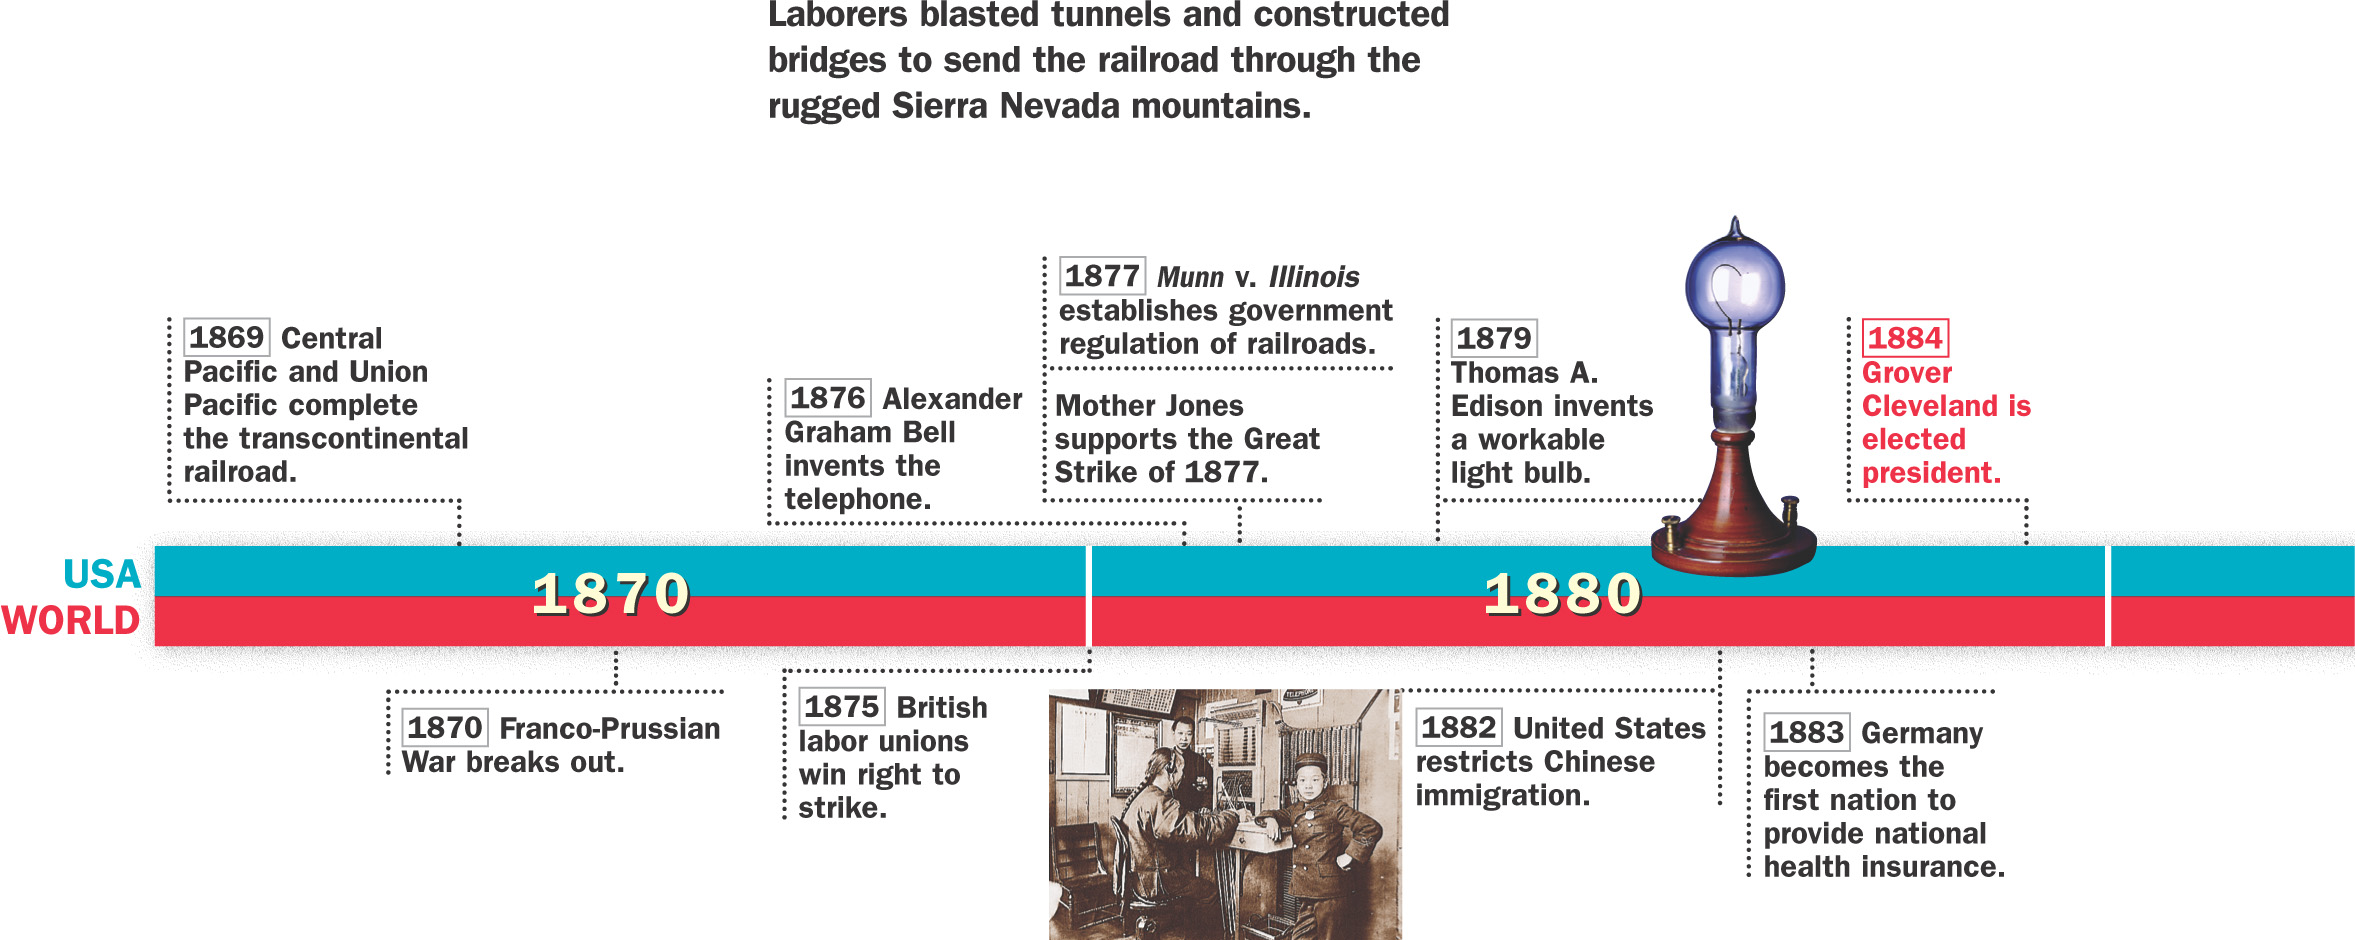 A timeline of historical events from 1869 to 1900 in both the U.S. and the world